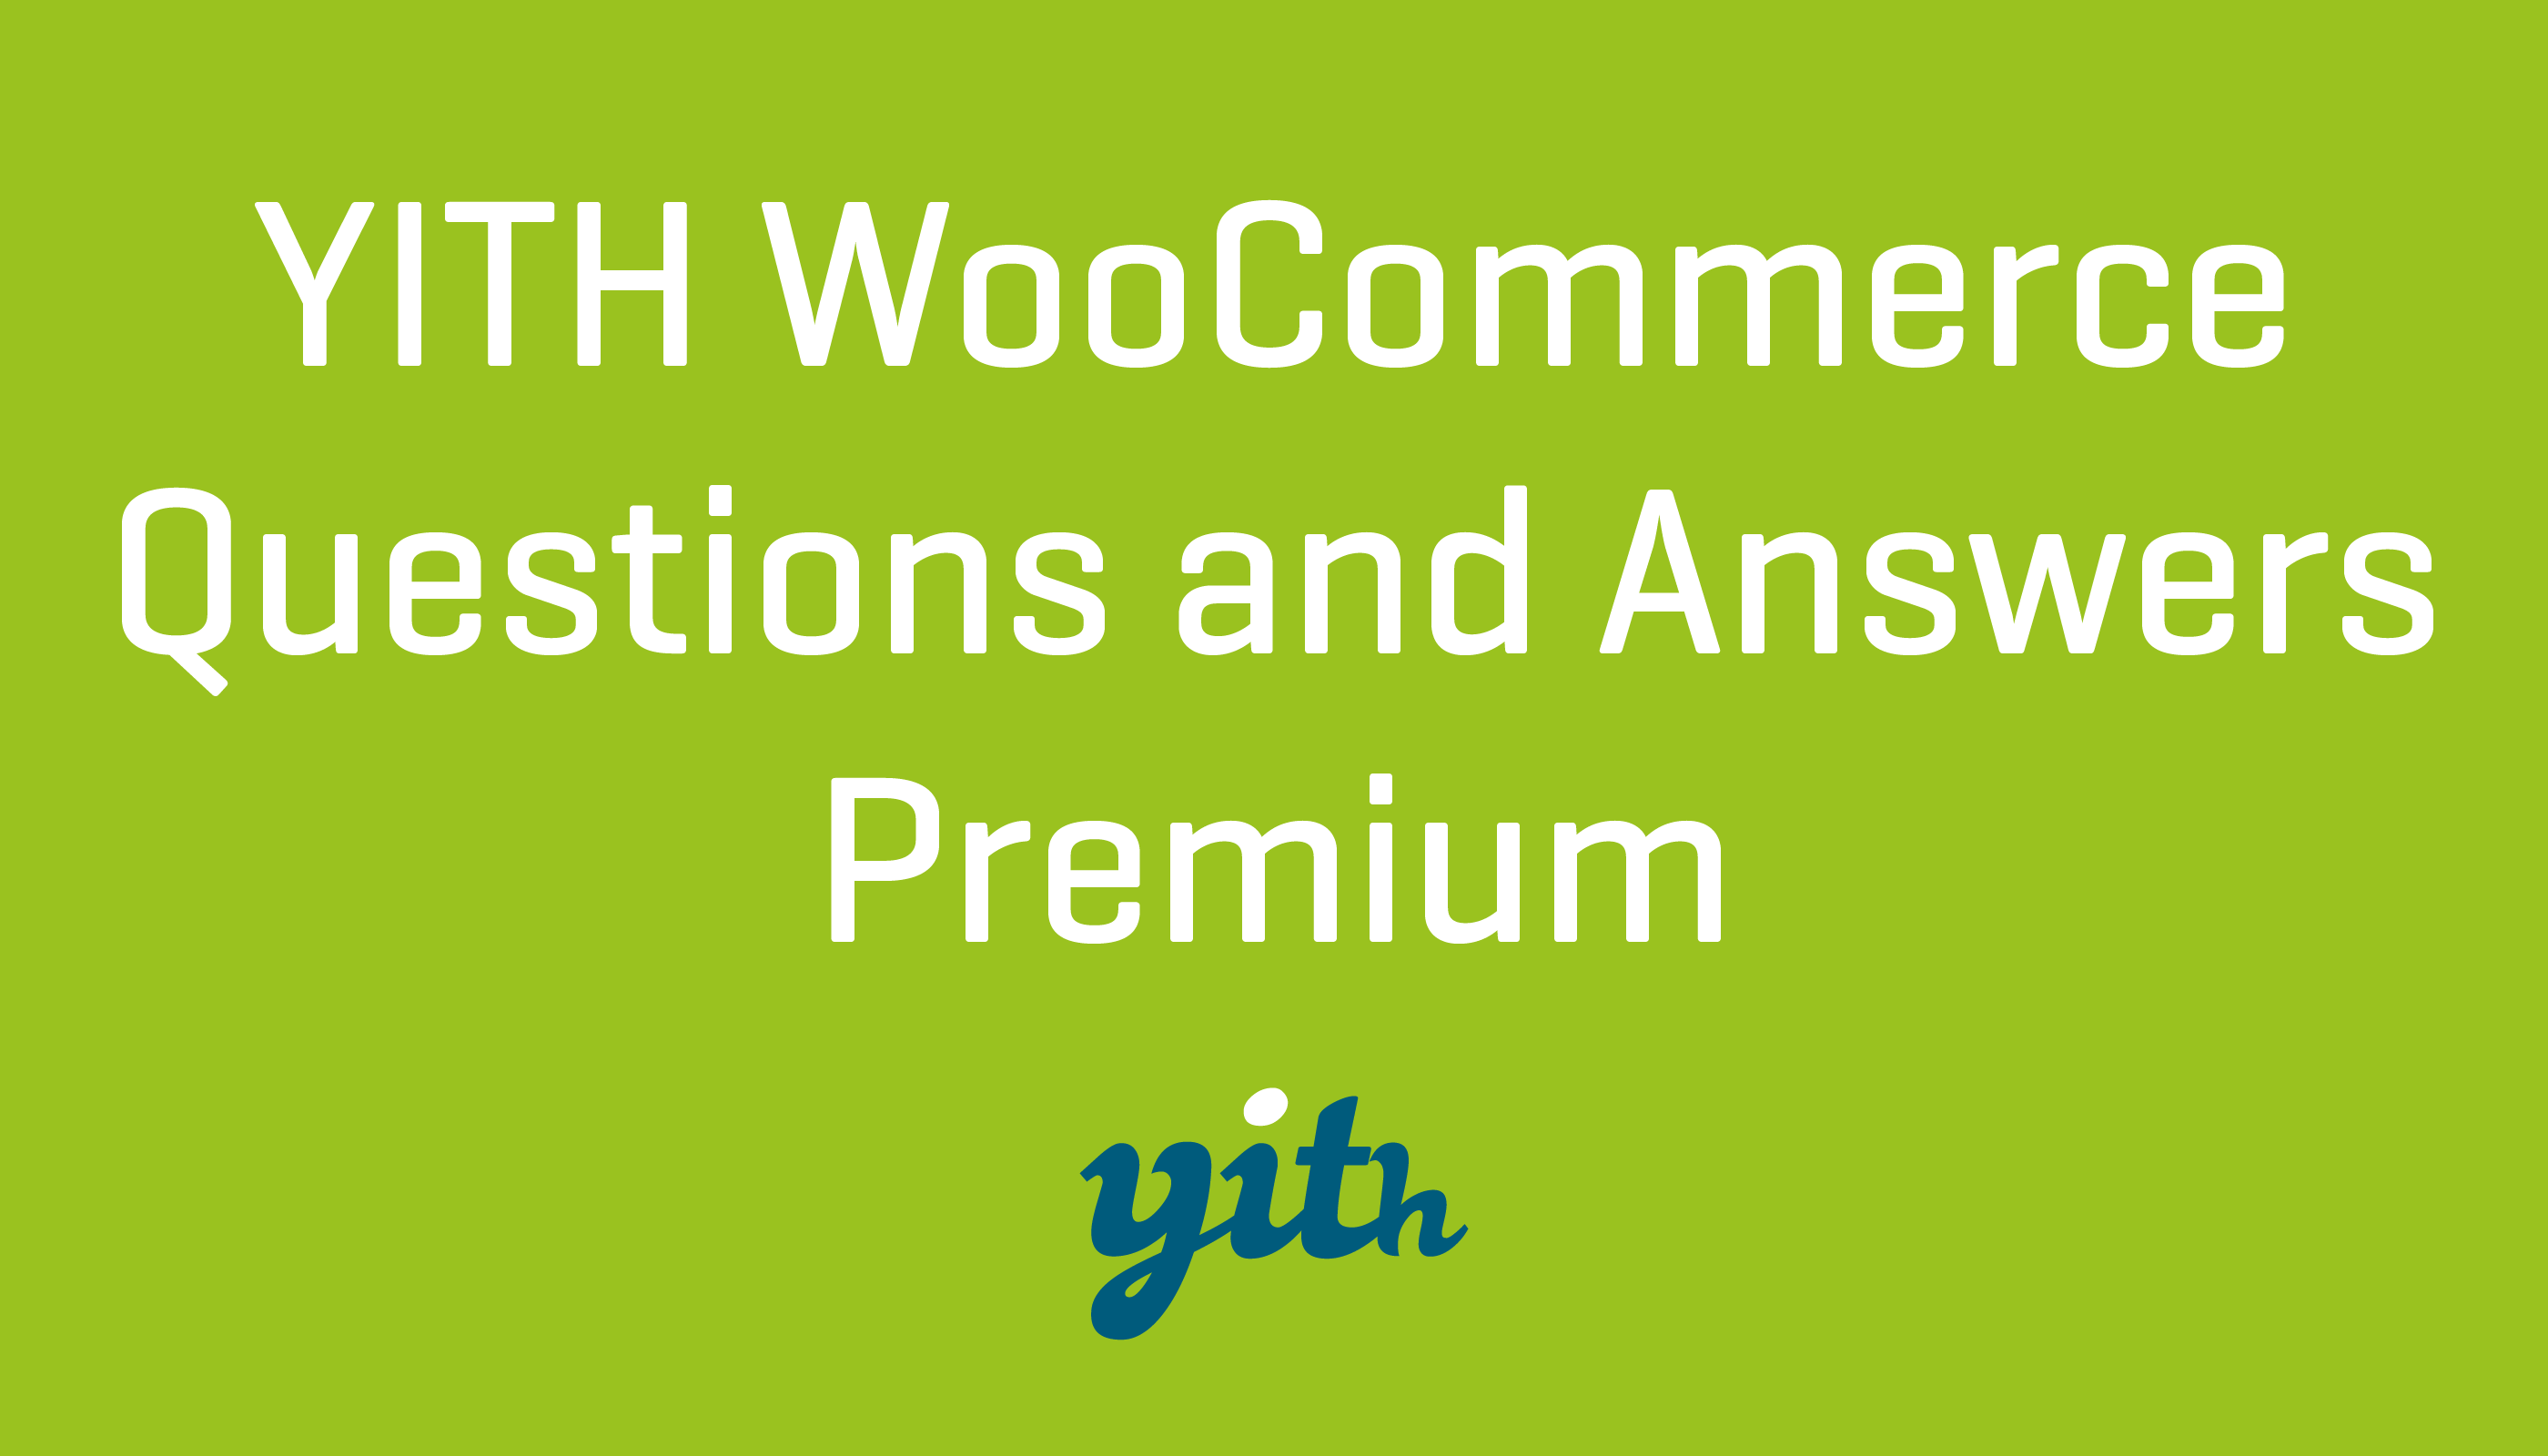 Yith WooCommerce Questions and Answers Premium